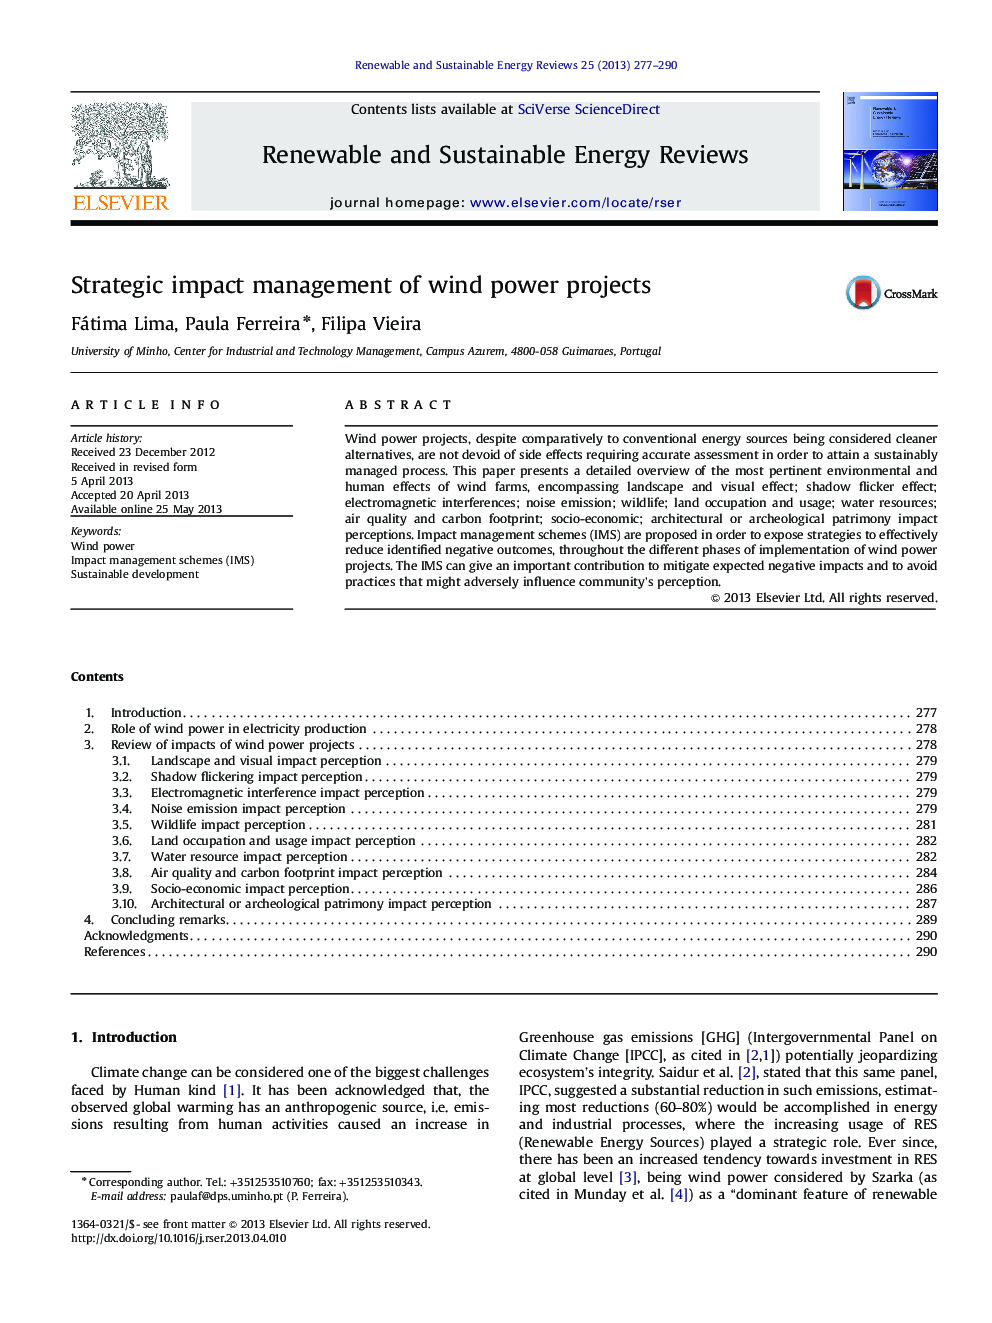 Strategic impact management of wind power projects